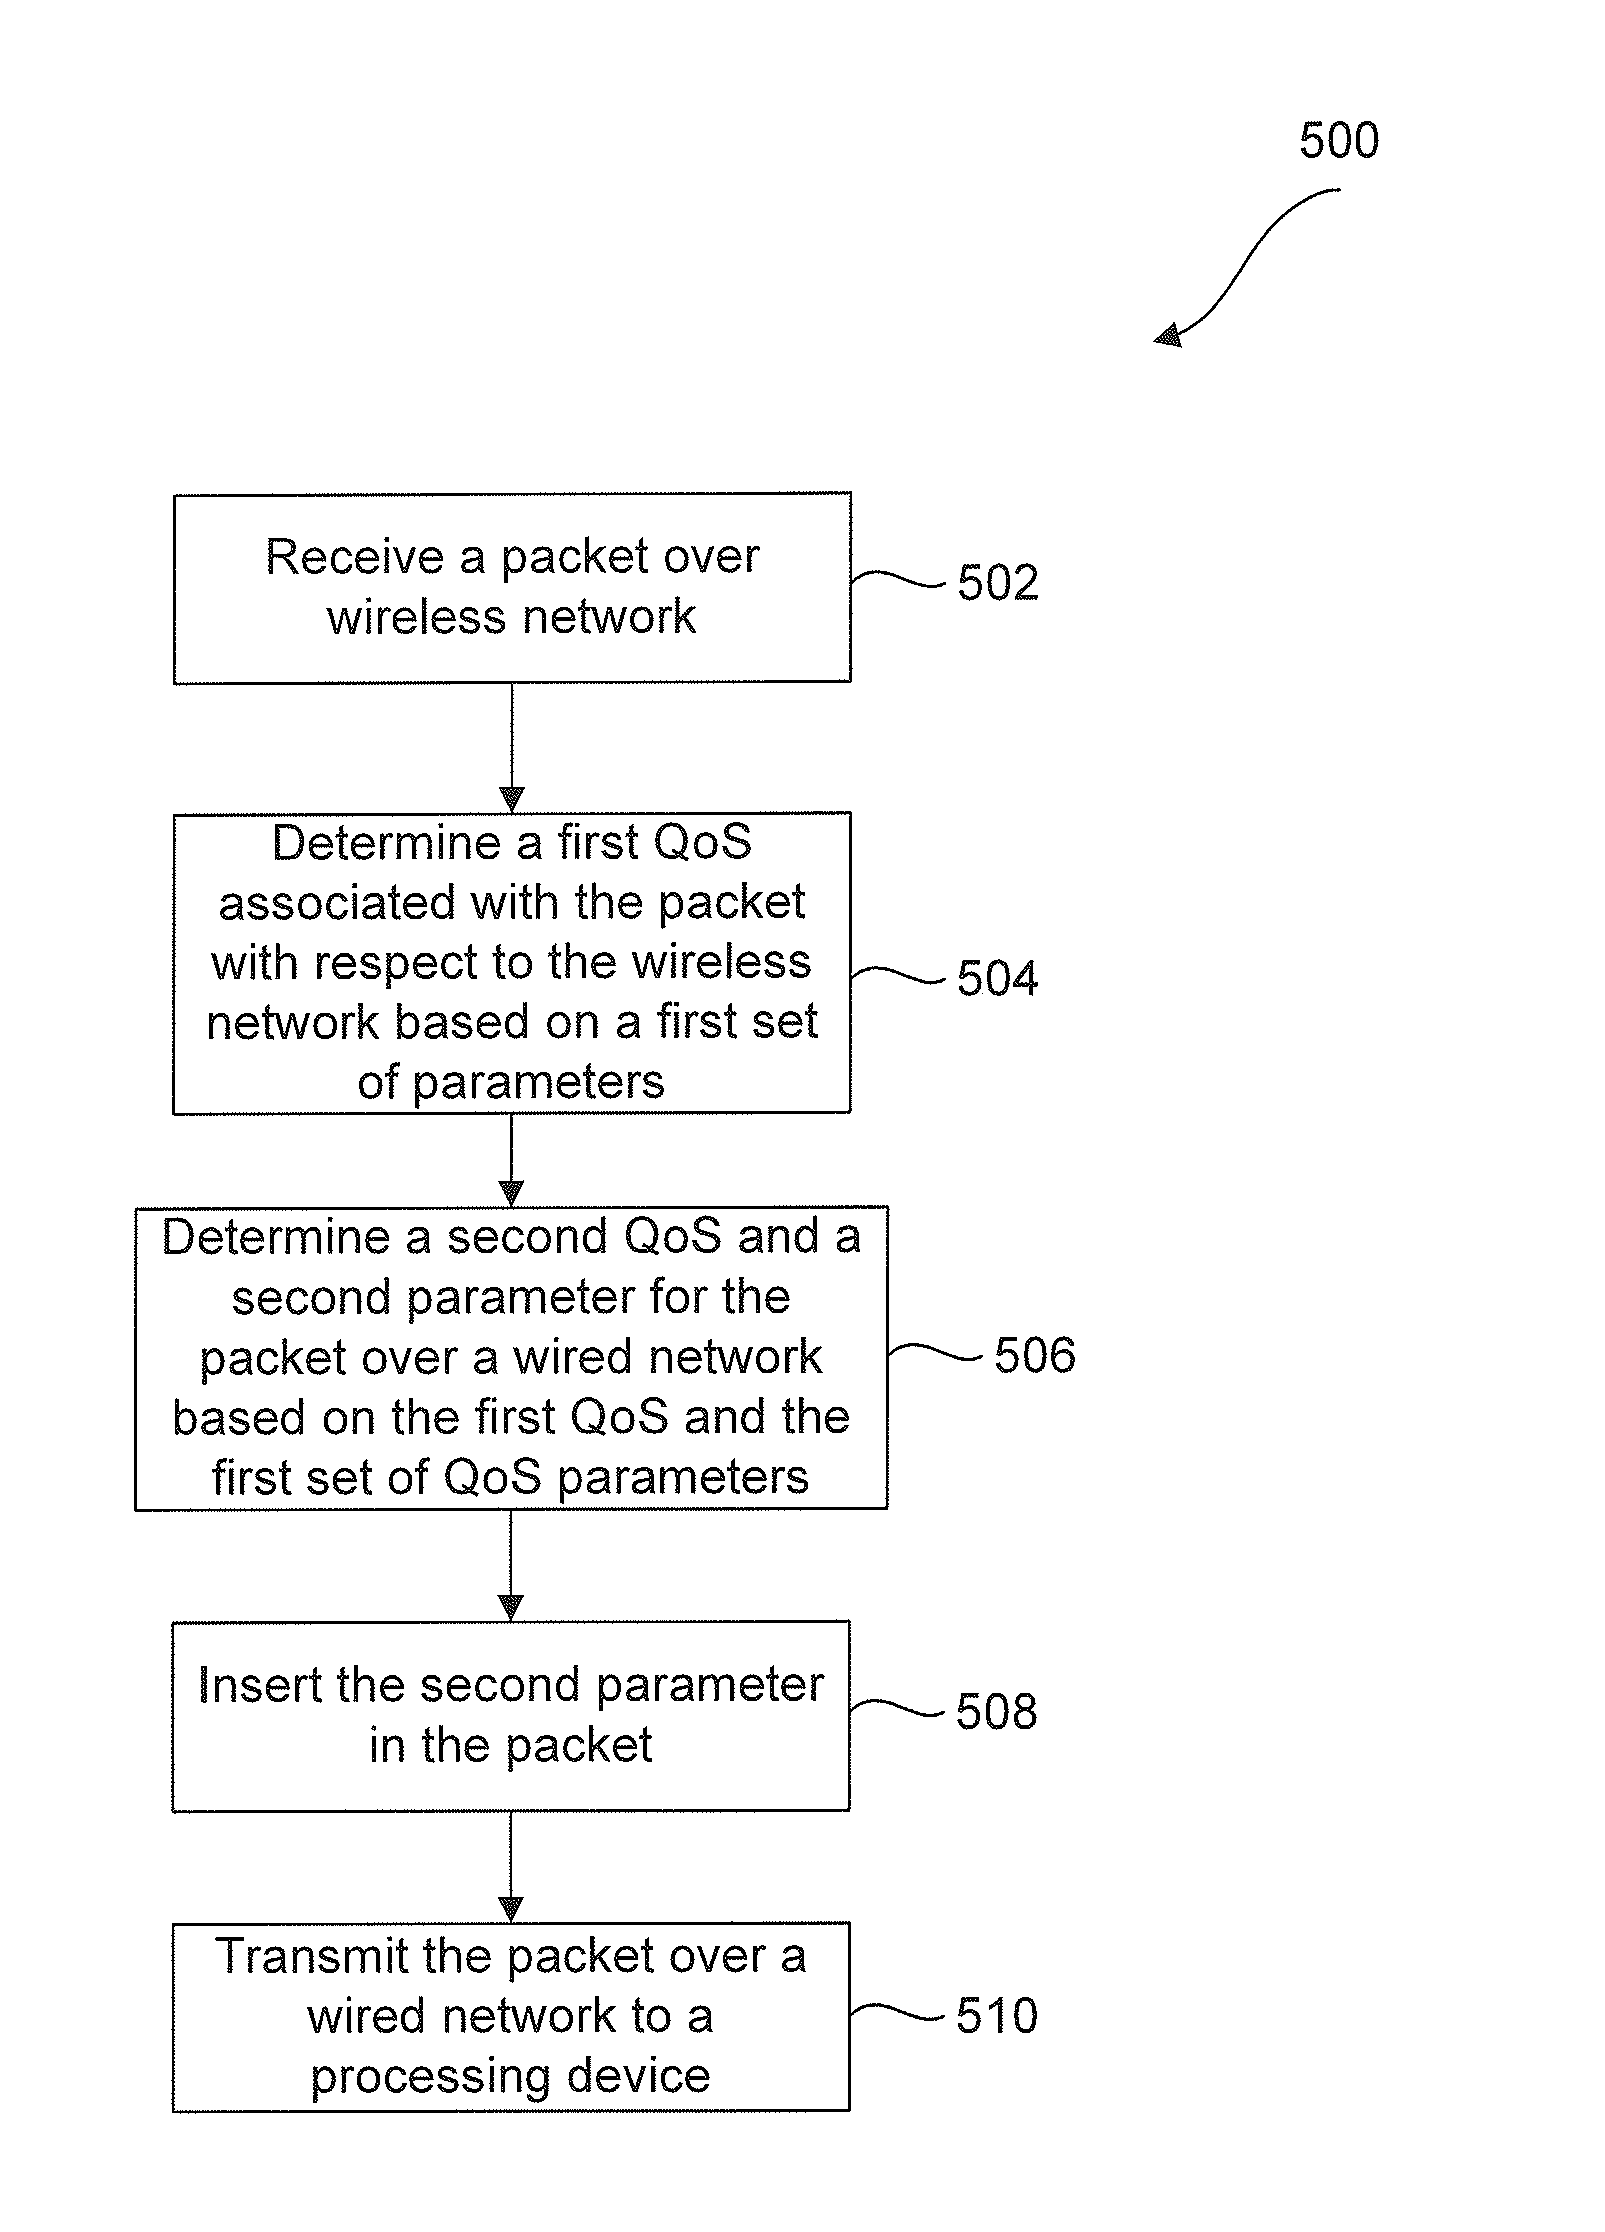 Methods quality of service (QOS) from a wireless network to a wired network